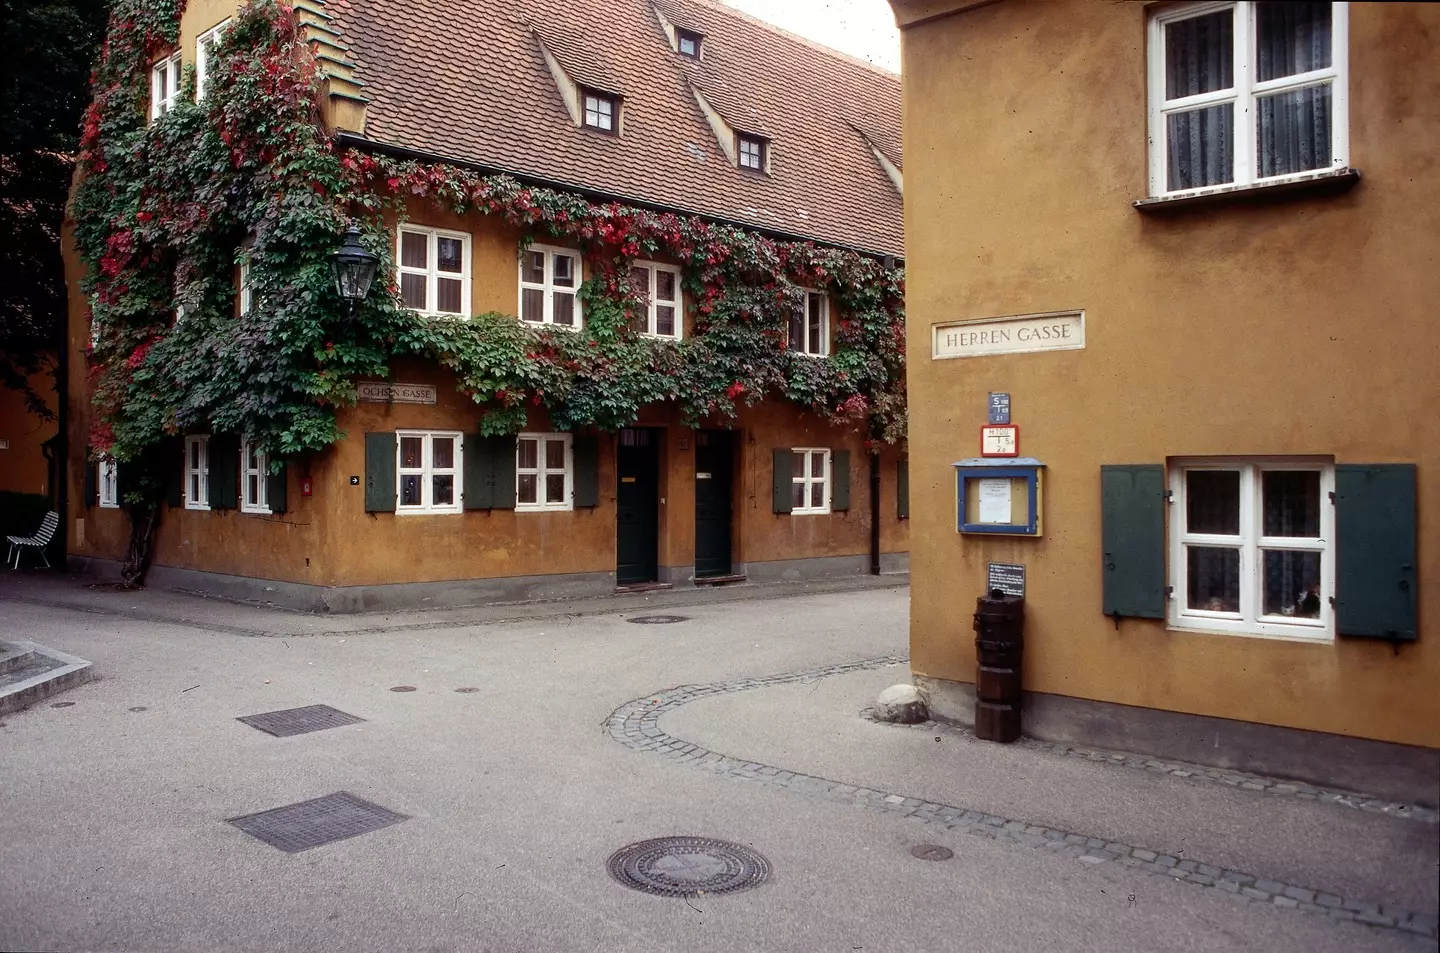 The Fuggerei was built in 1516 and is the world's oldest public housing project.